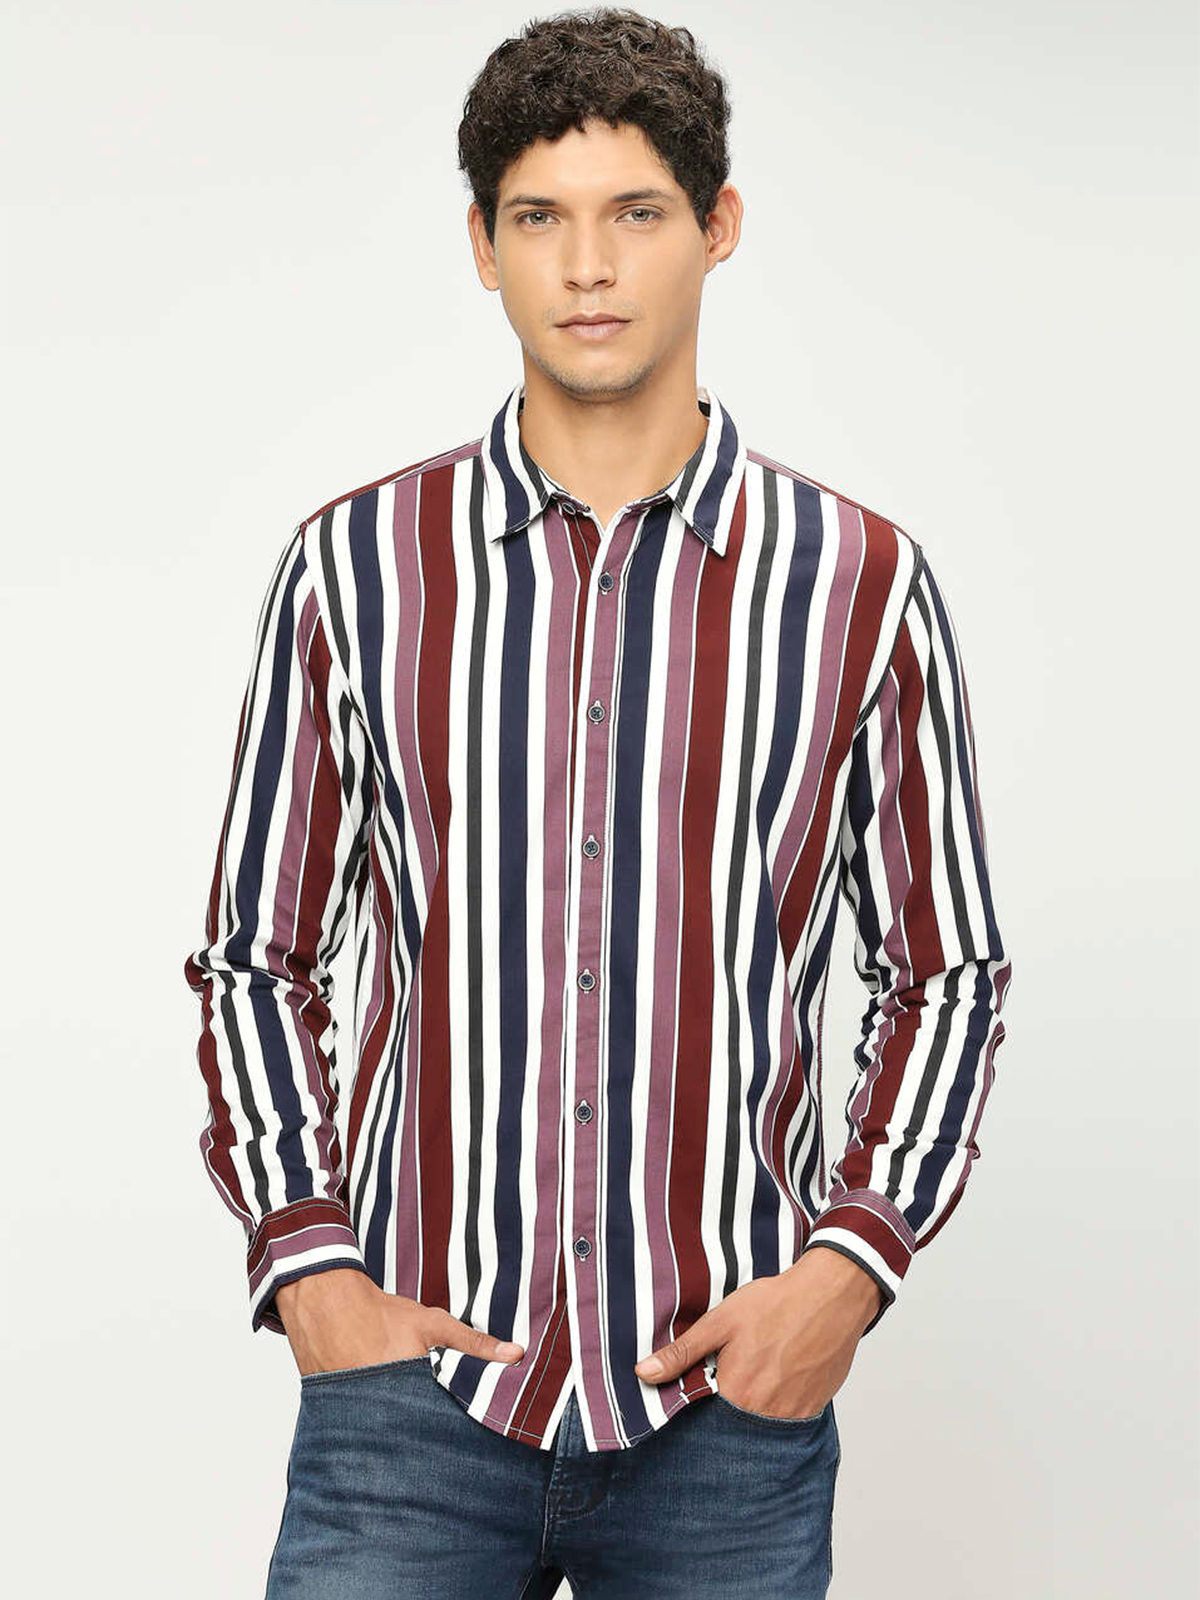 Pepe Jeans red and blue stripe shirt - G3-MCS12192